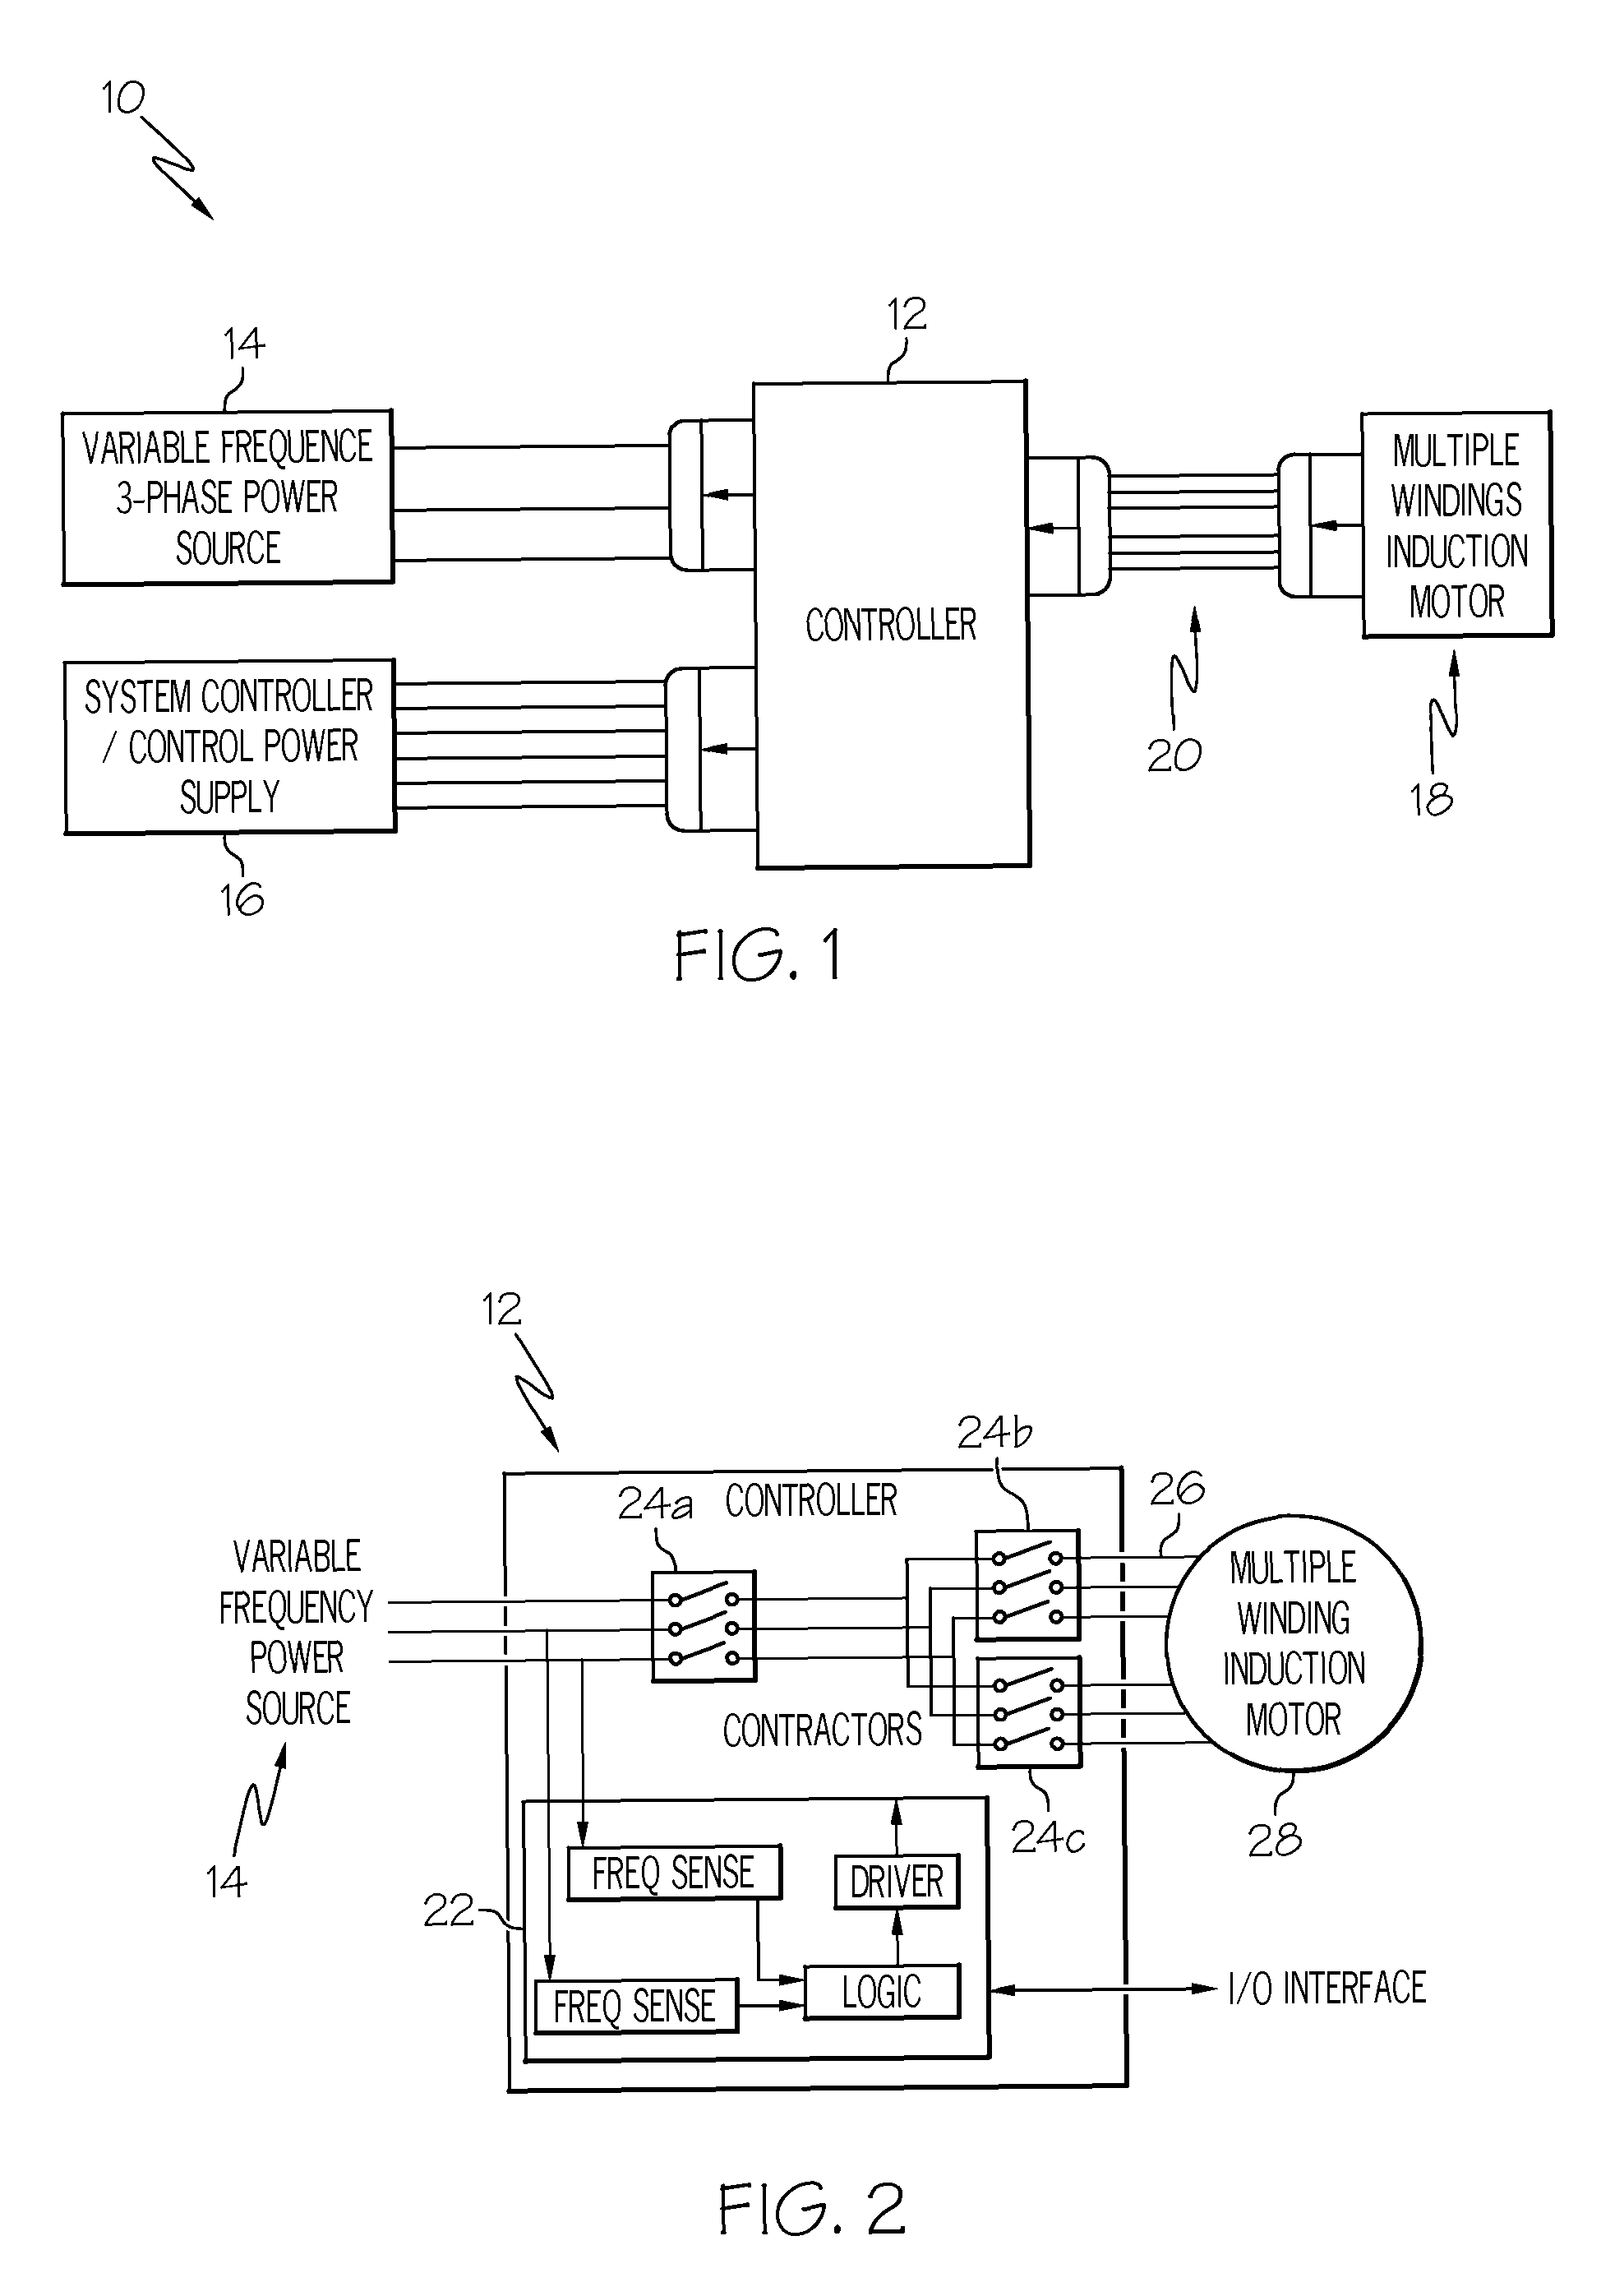 Variable frequency reduced speed variation electric drive